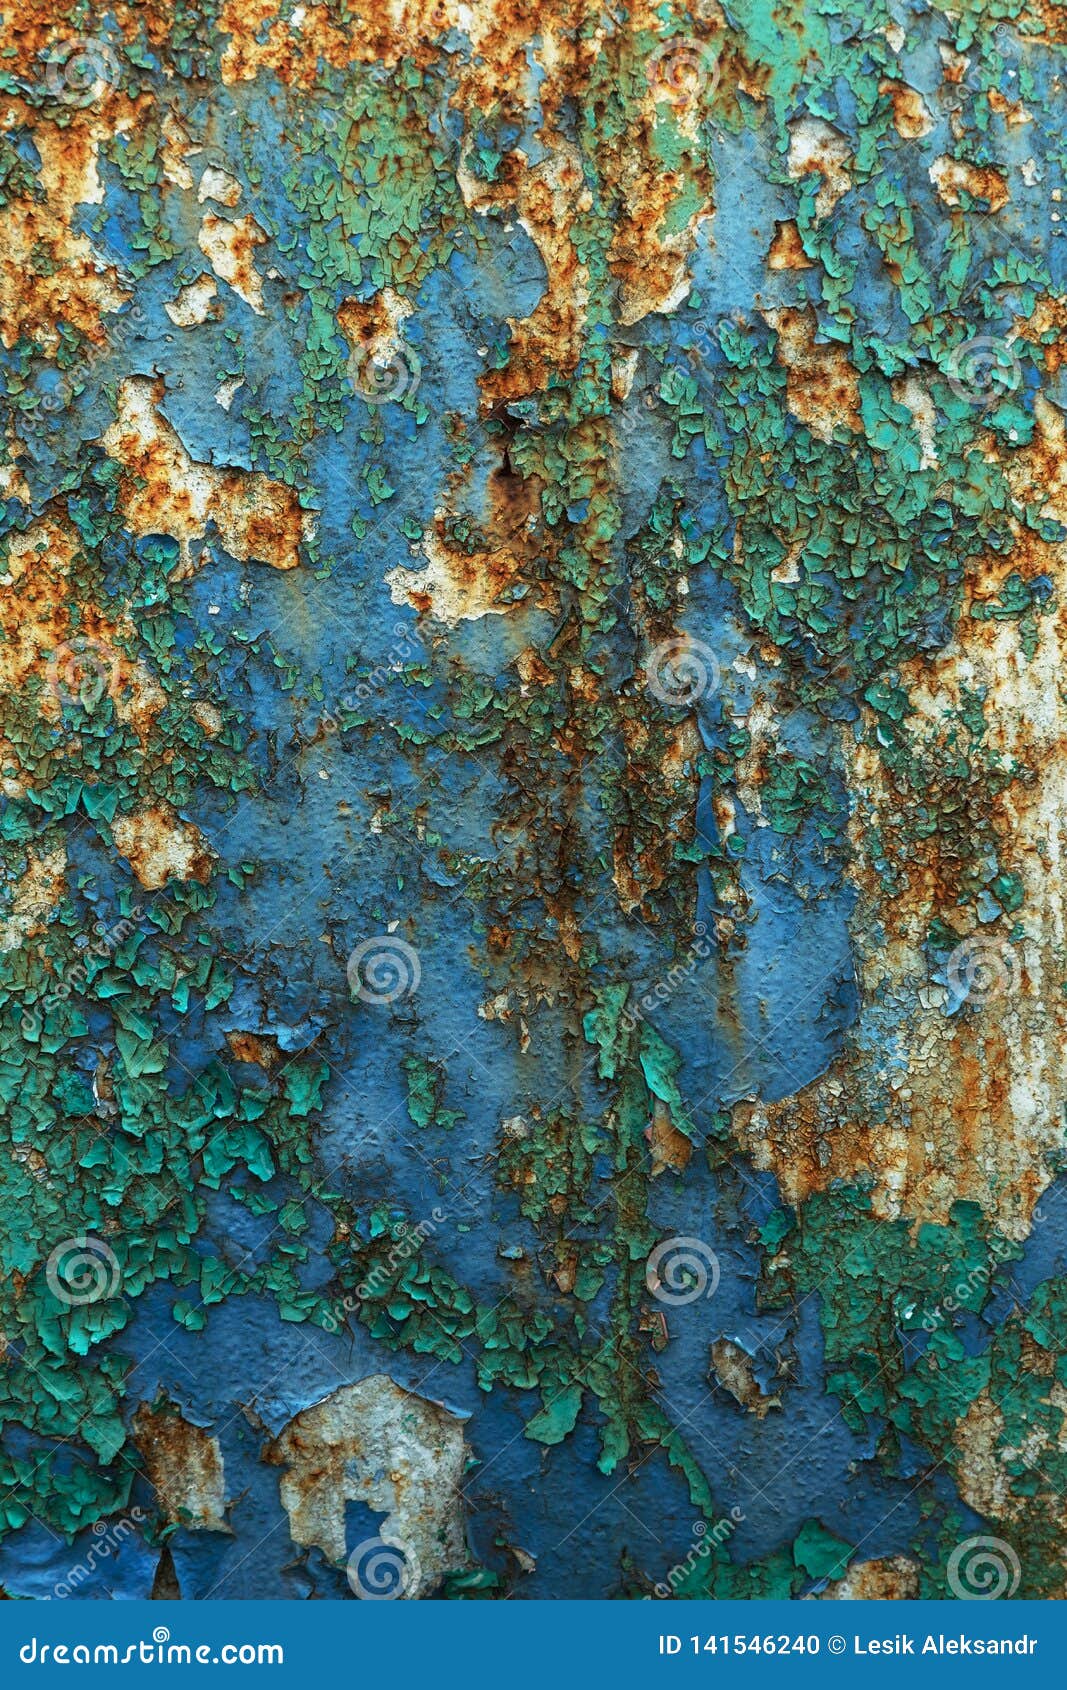 Rusty Metal Wall, Old Iron Sheet, Covered With Rust With Multicolored Paint. Trace Of Remnant